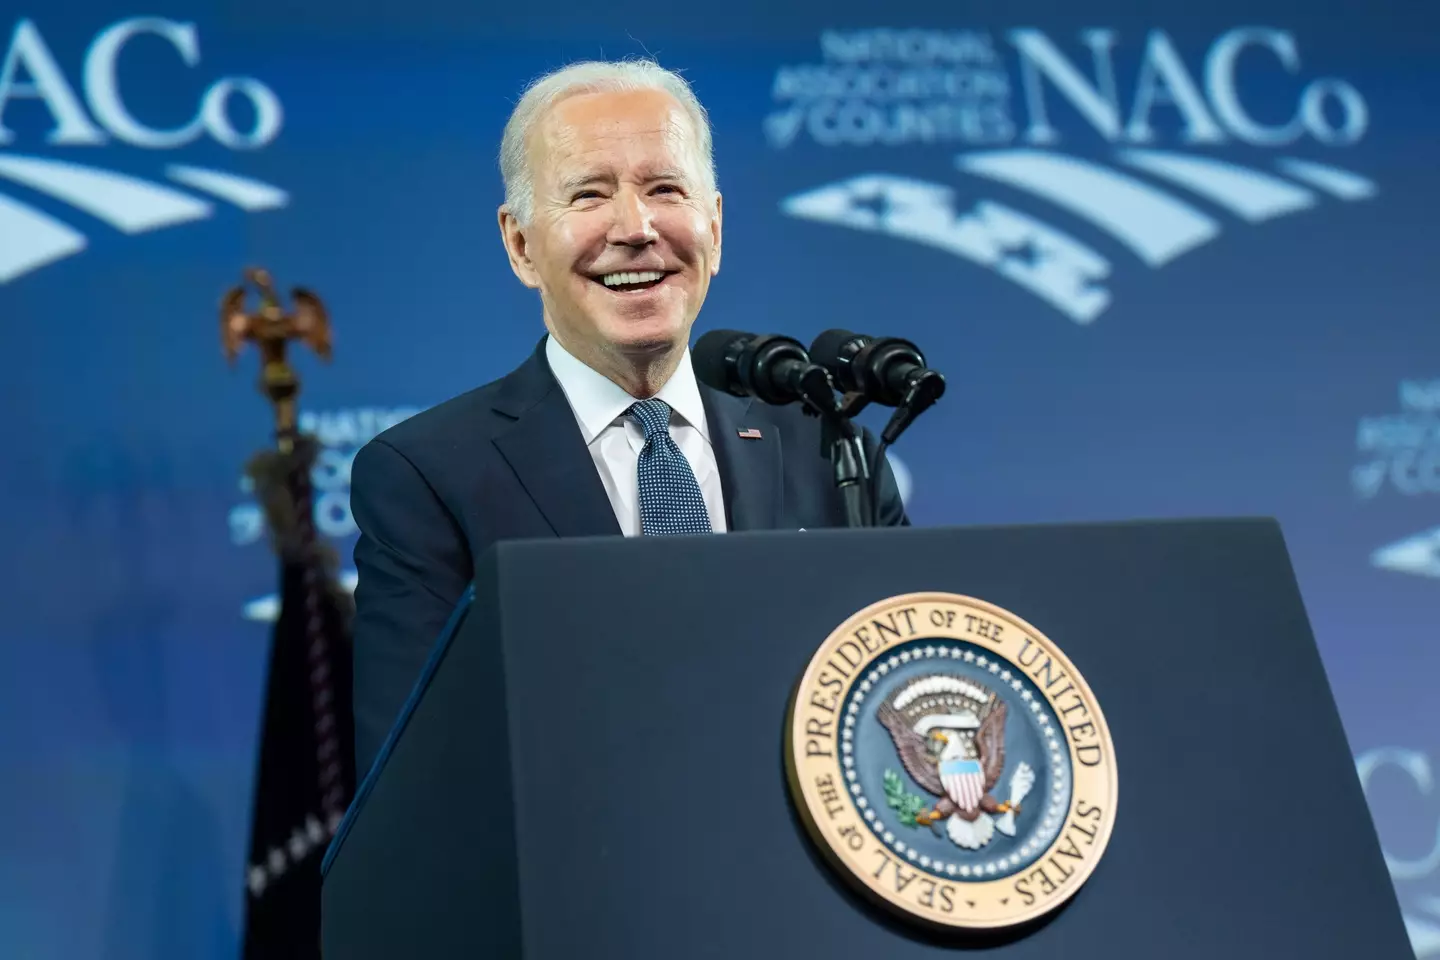 President Biden is 'incredibly pleased' by the results.